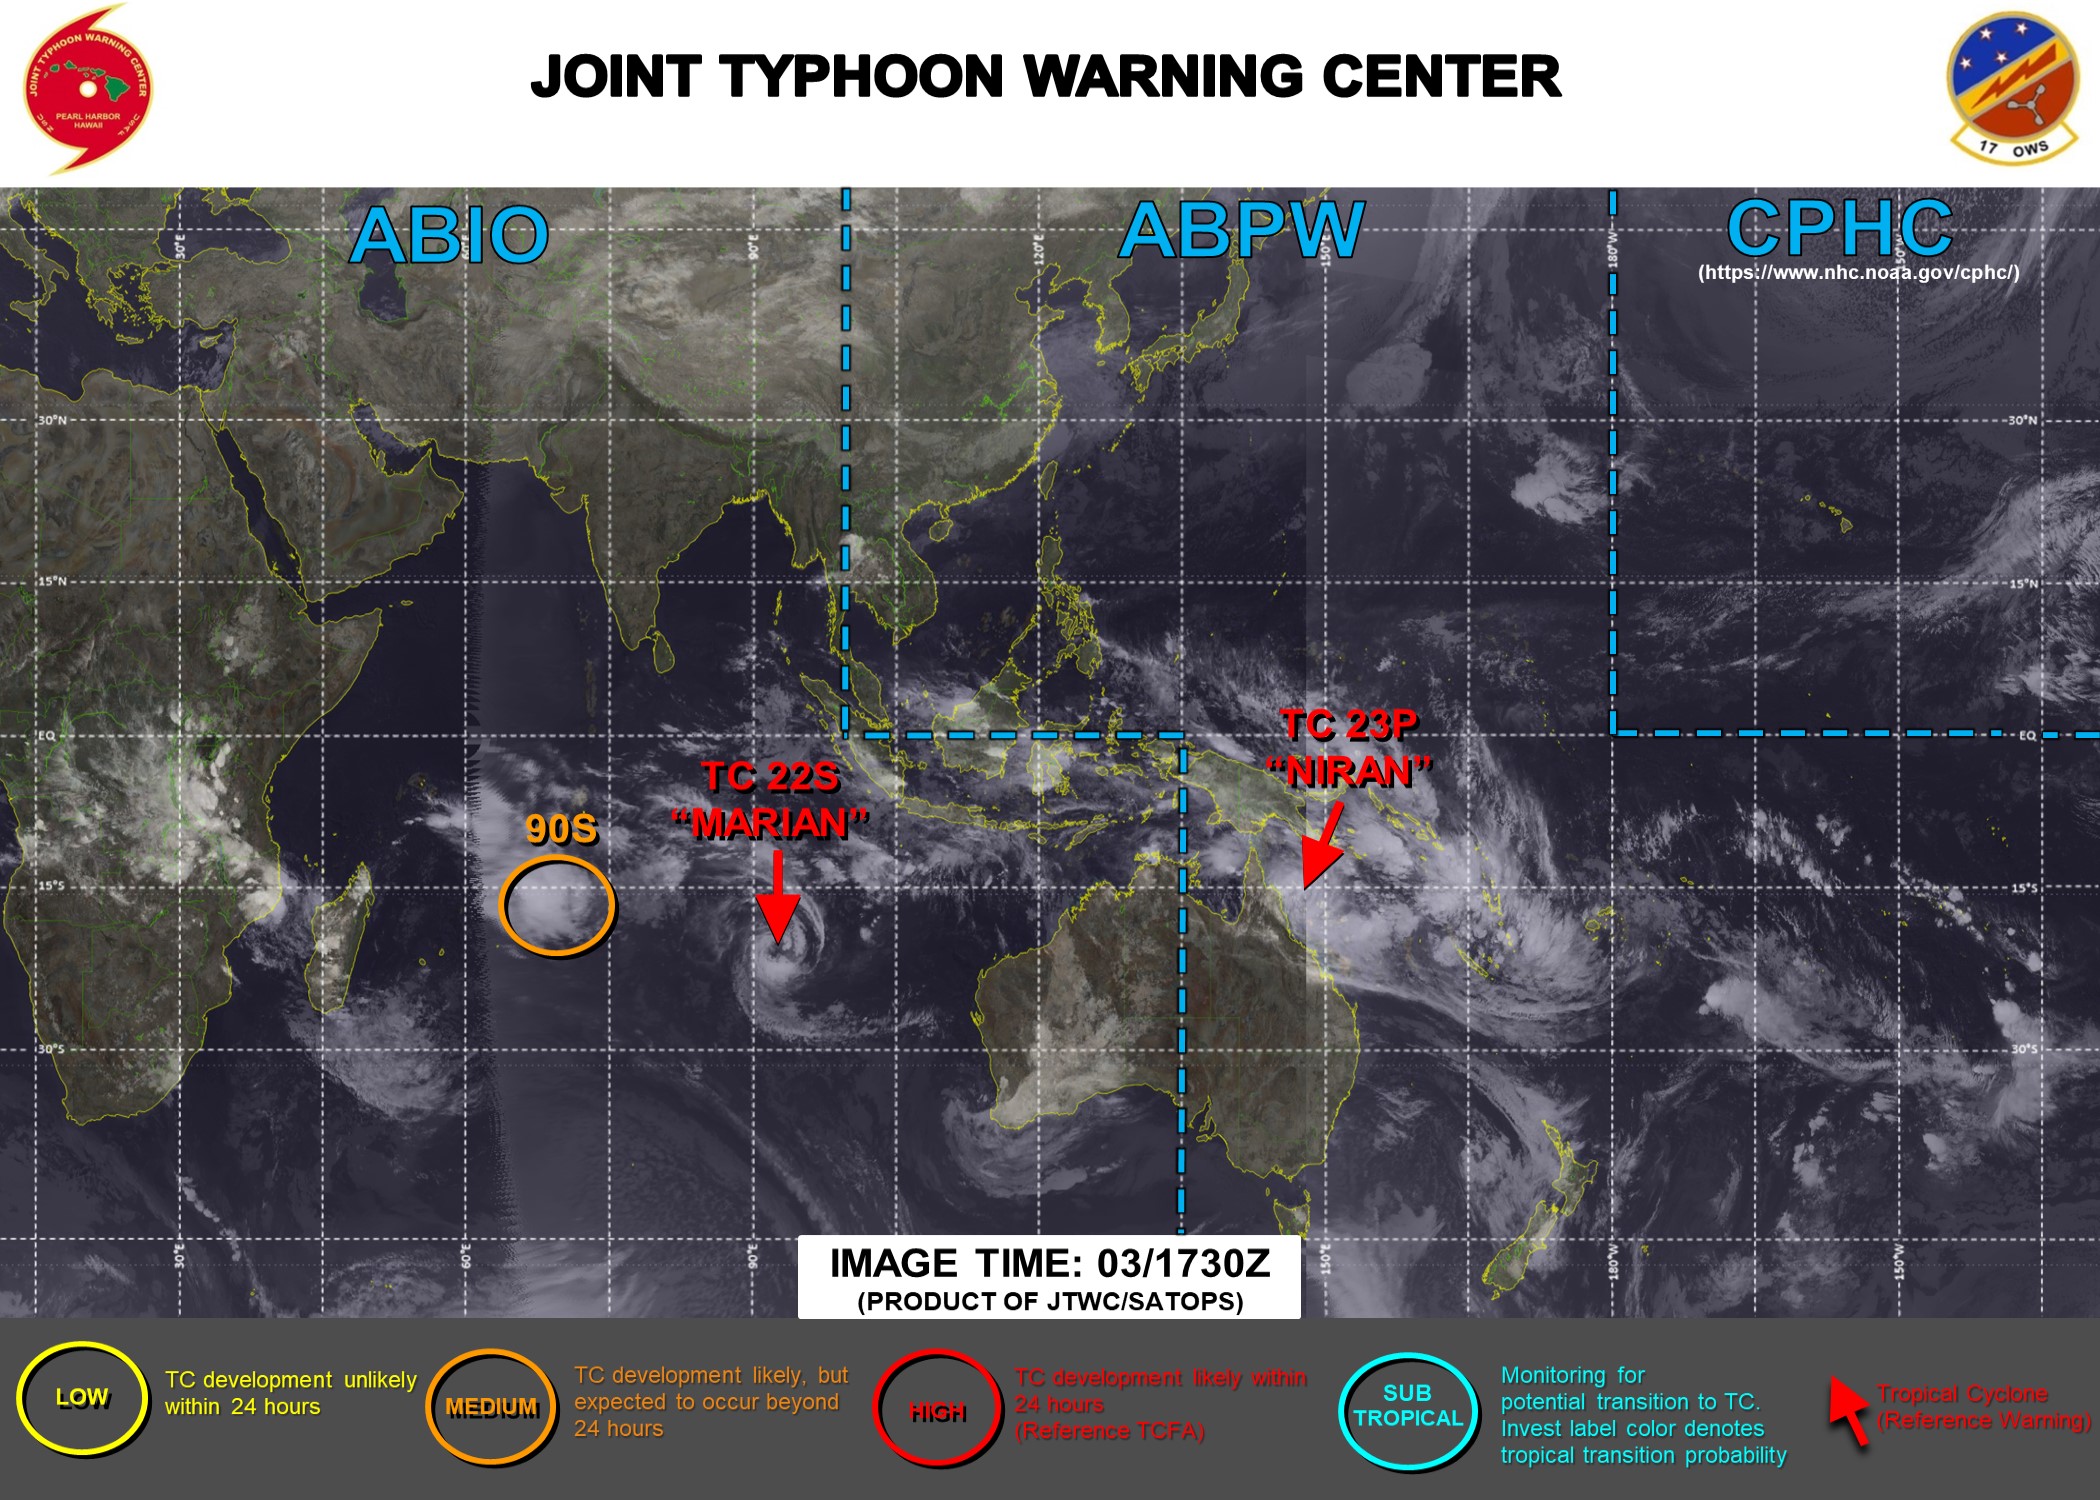 03/18UTC. JTWC HAS BEEN ISSUING 6HOURLY WARNINGS ON 23P(NIRAN) AND 12HOURLY WARNINGS ON 22S(MARIAN). 3 HOURLY SATELLITE BULLETINS ARE ISSUED FOR BOTH SYSTEMS. INVEST 90S IS NOW ON THE MAP WITH CURRENTLY MEDIUM CHANCES OF REACHING 35KNOTS WITHIN 24HOURS. REFER TO THE CHART BELOW.